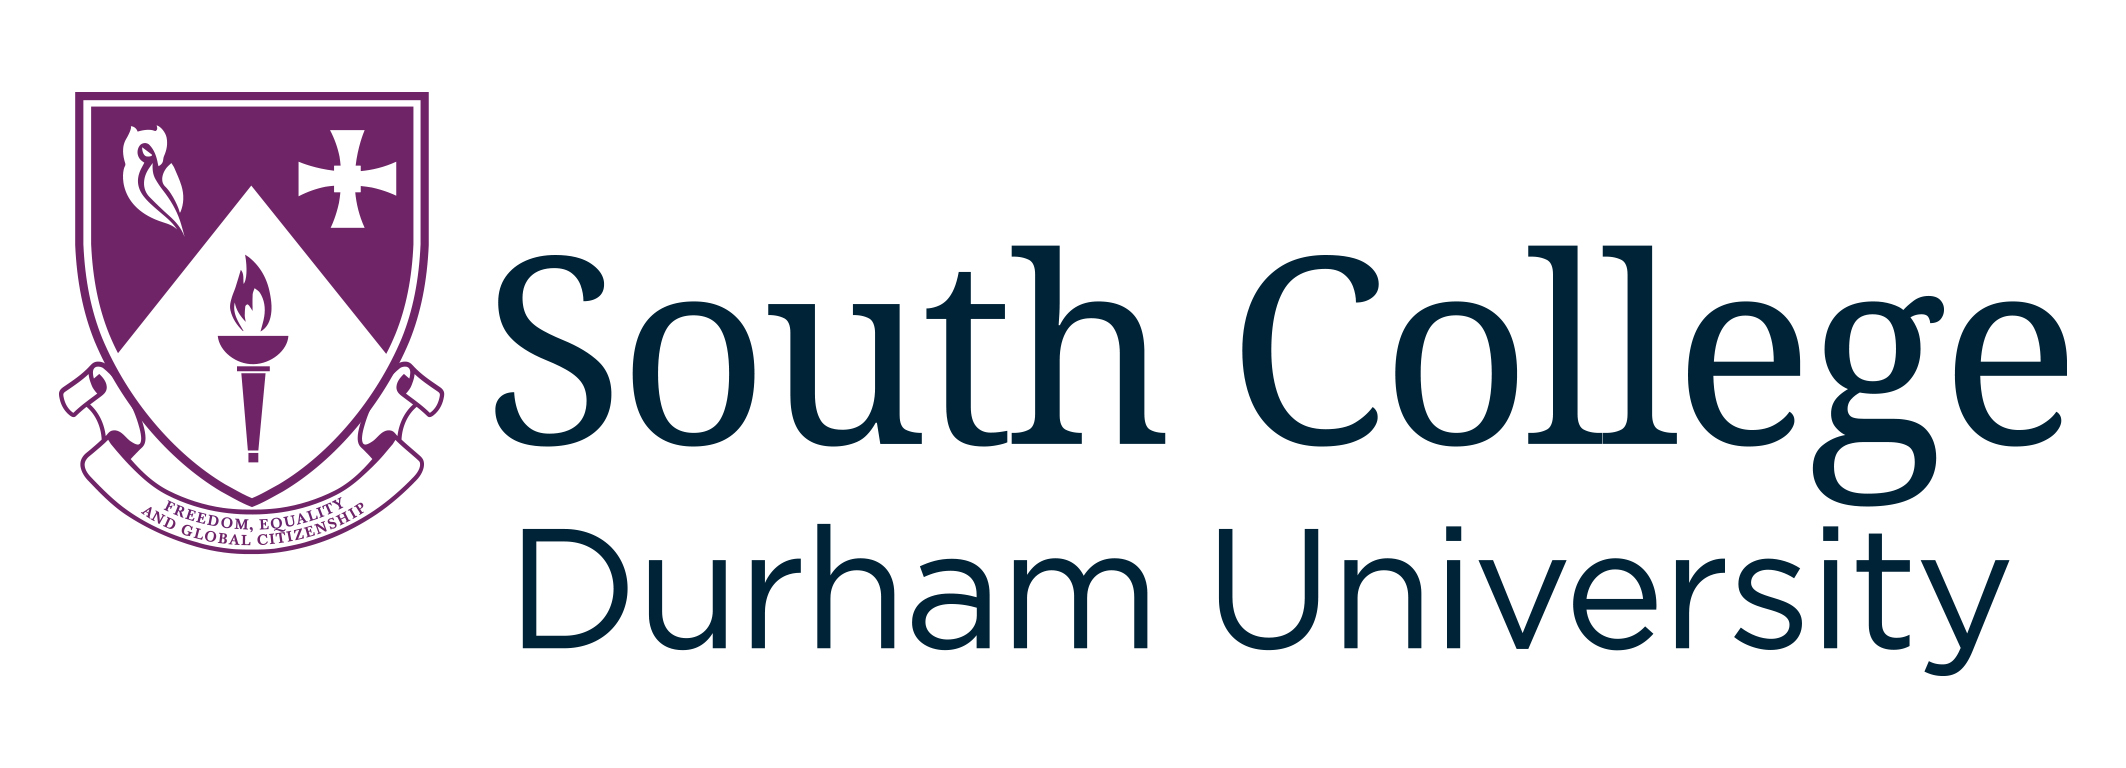 South College gown - NON JCR member